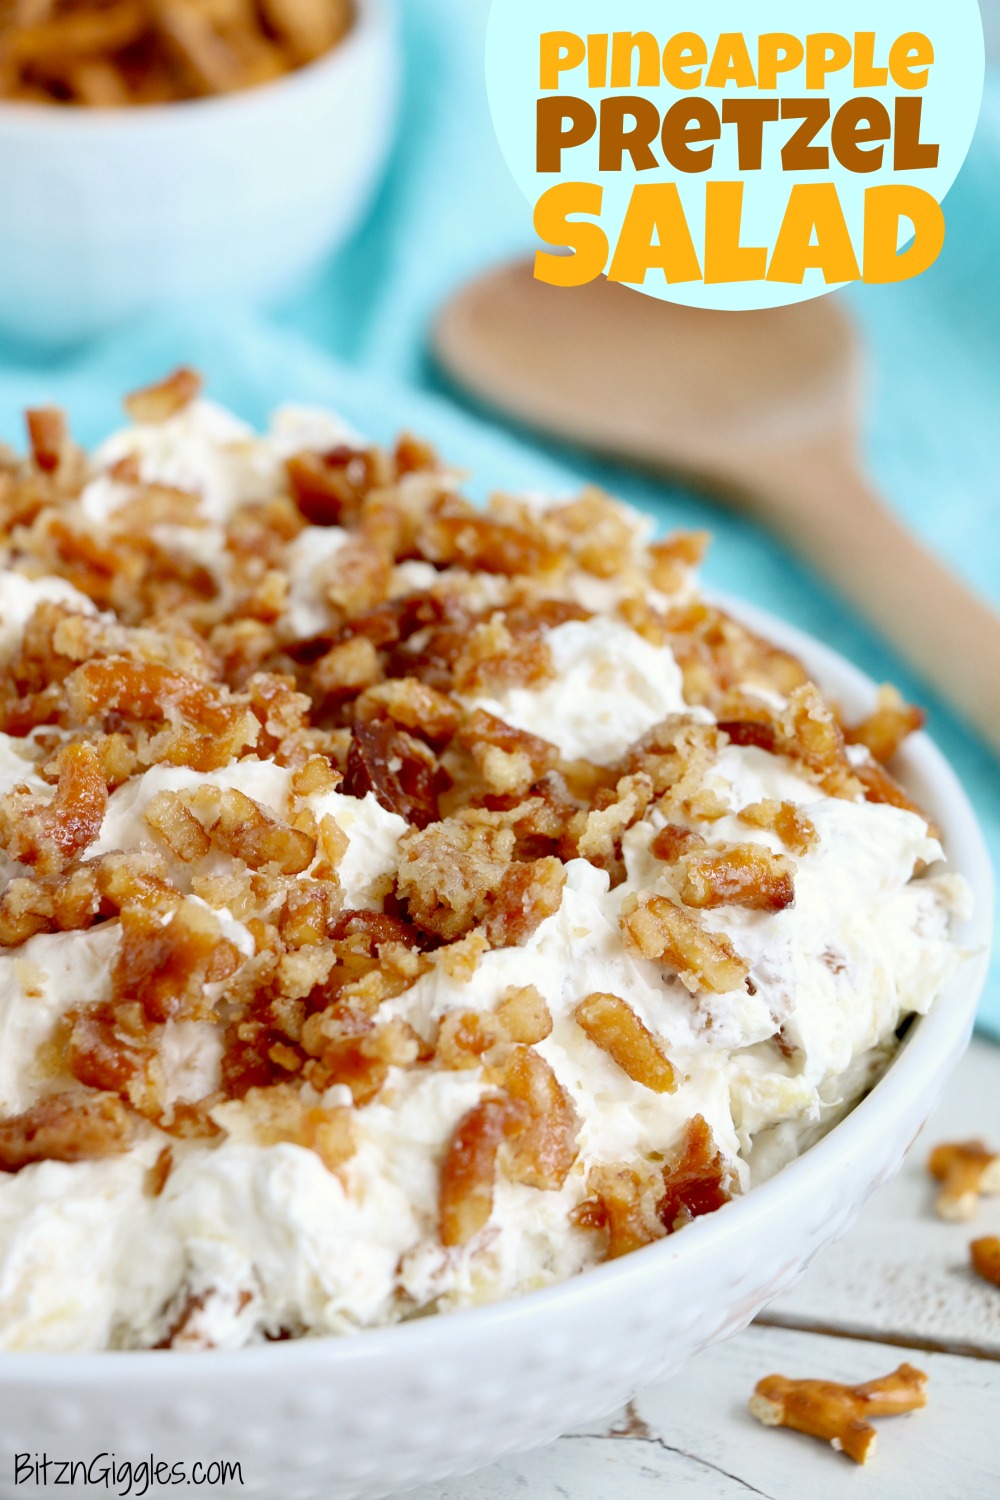 Pineapple Pretzel Salad - This cool, creamy pineapple fluff filled with candied pretzels is the perfect combination of sweet and salty, and can be served as a dessert or sweet side dish!